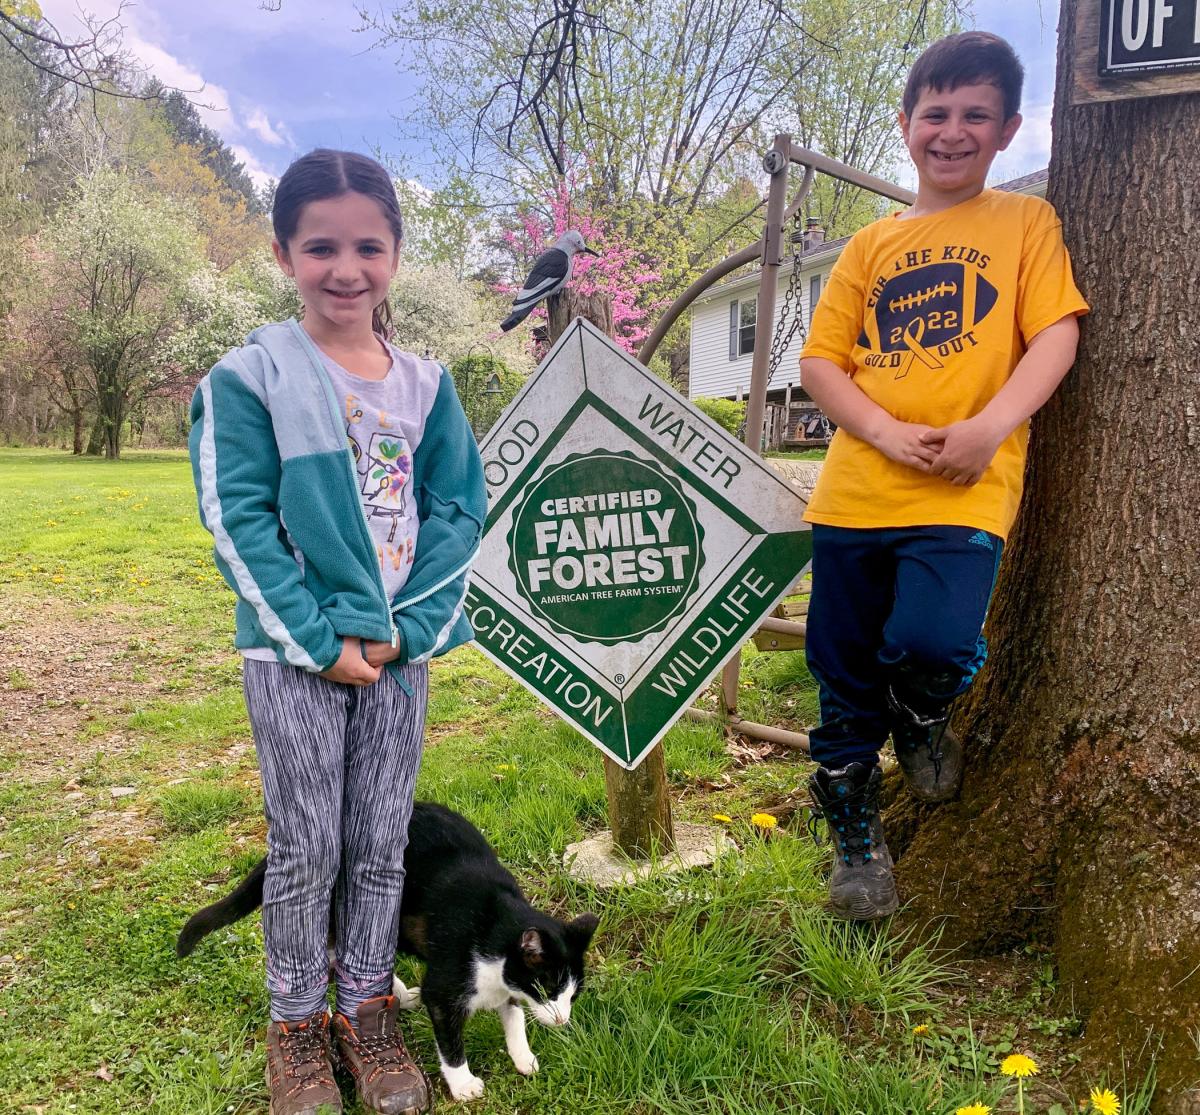 Ziva, Ari and Cat show off Trailing Pines Tree Farms’ Certified Family Forest designation.